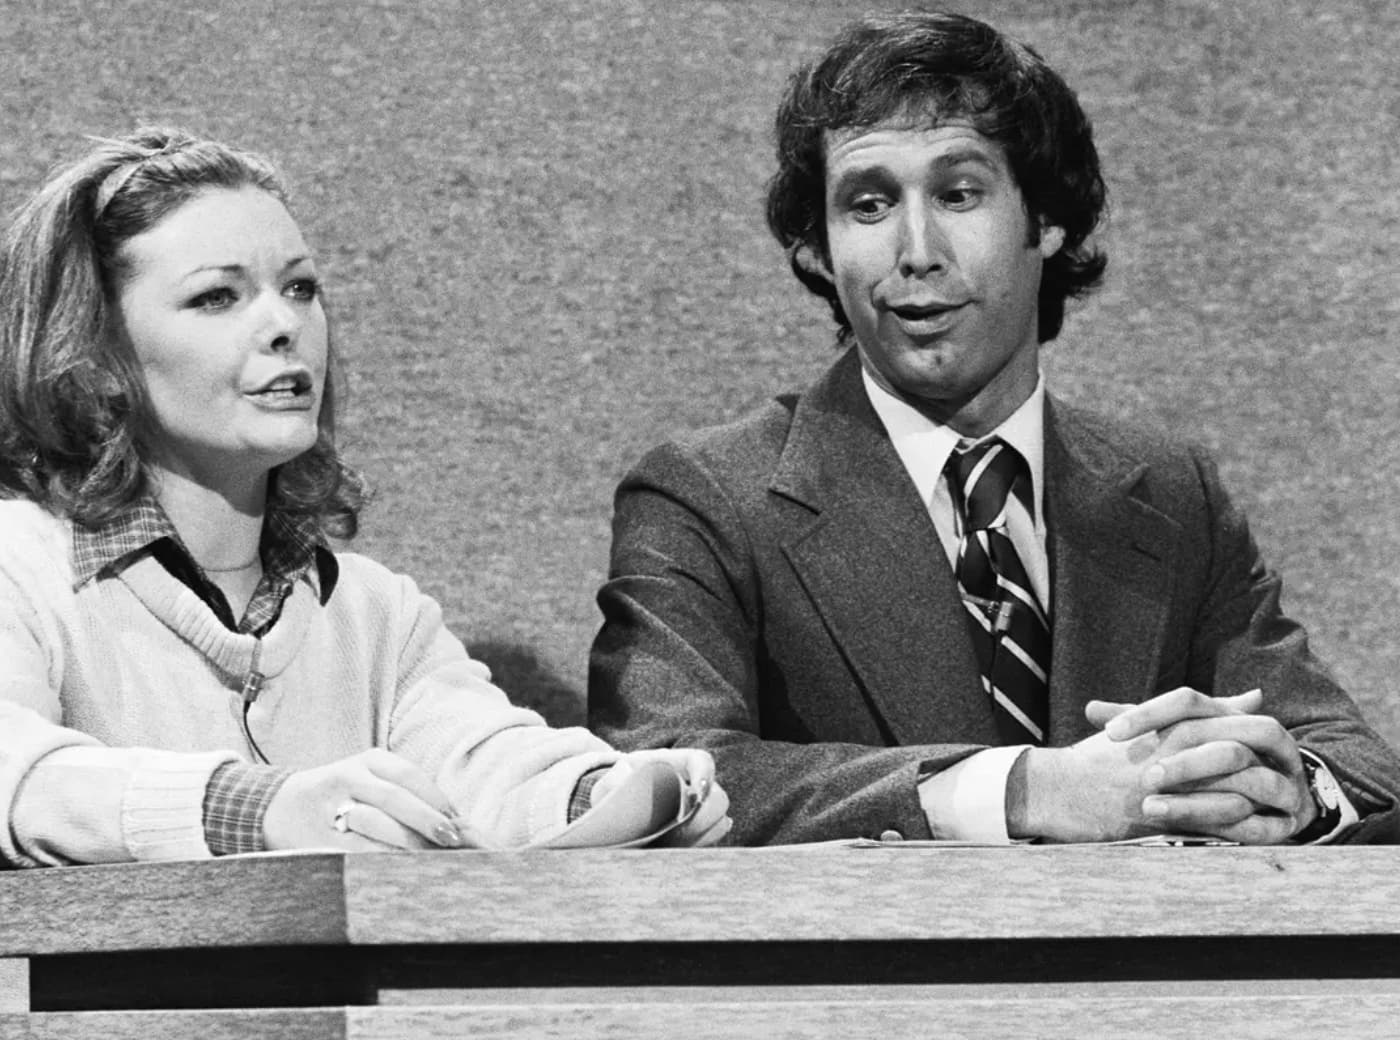 chevy chase and jane curtin